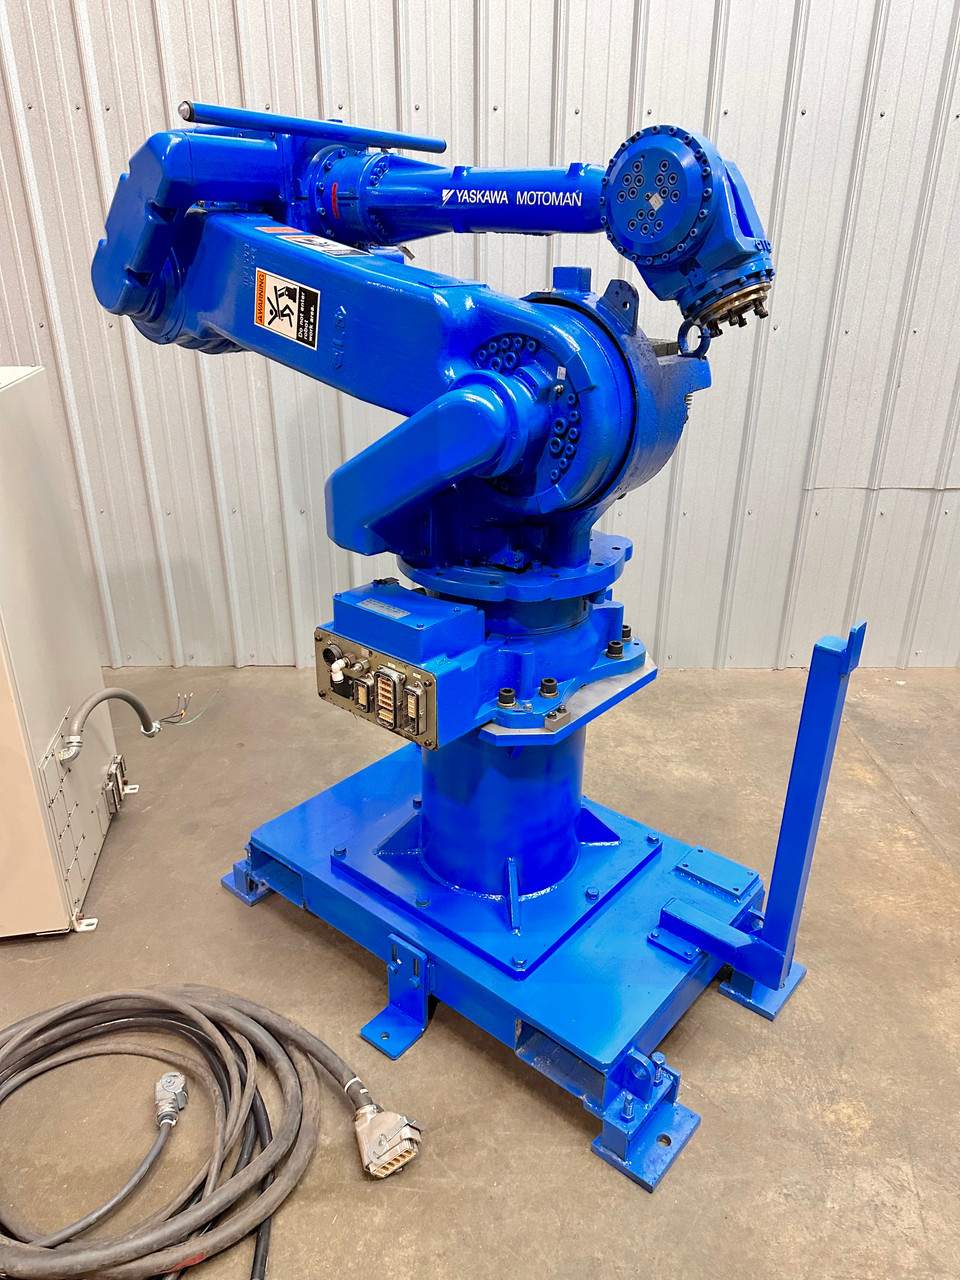 Motoman EH80 Robot NX100 Controller 80Kg Payload  2051mm Reach 6 Axis